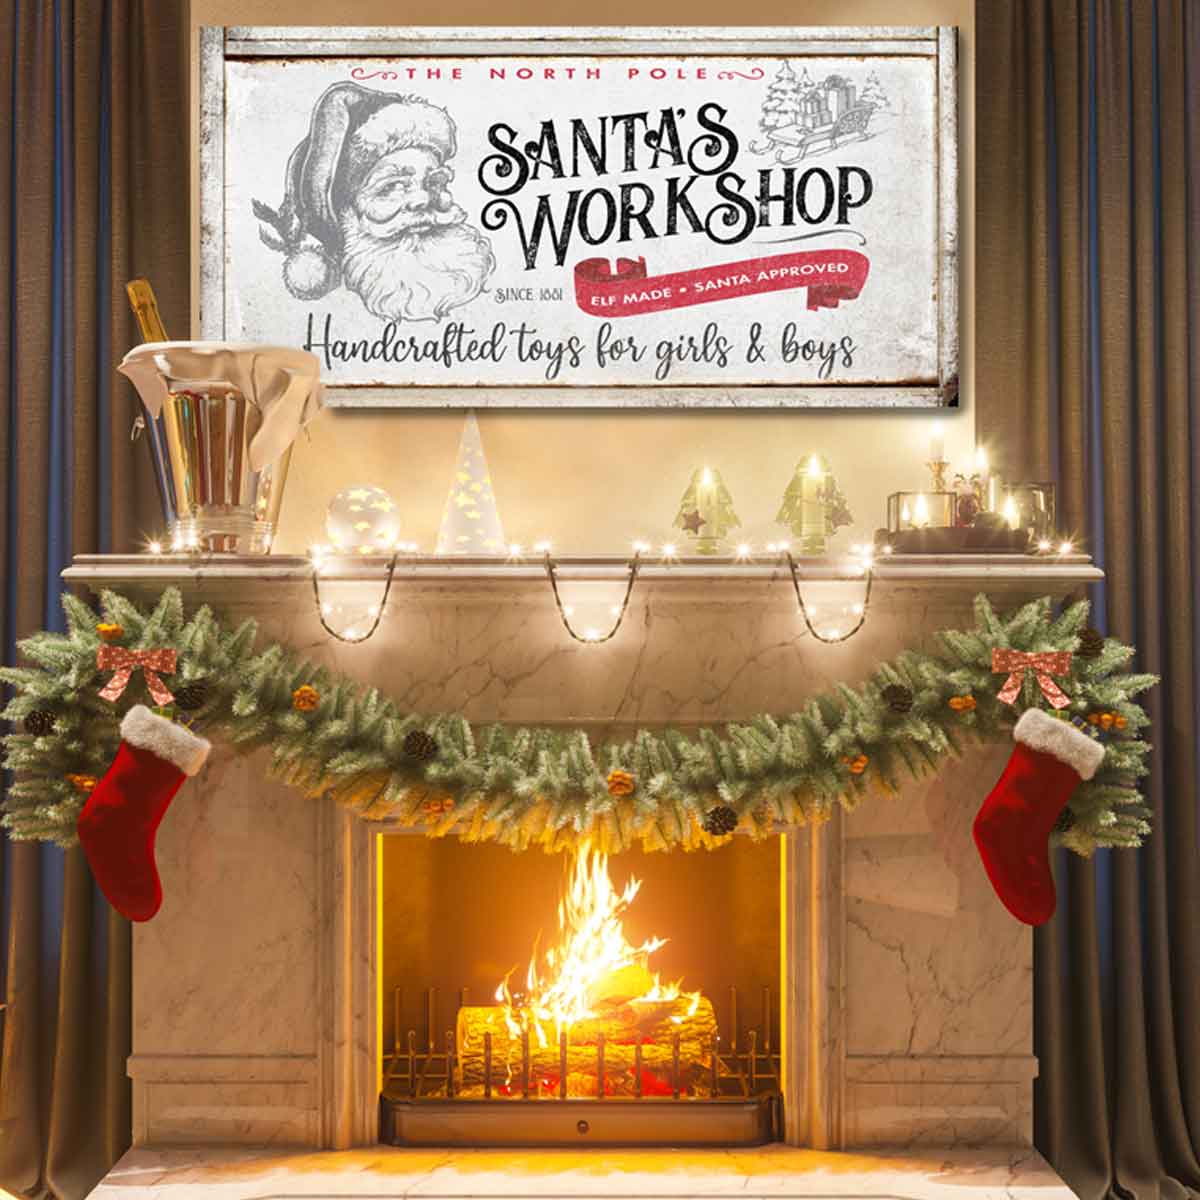 Tasteful Christmas Decor Santas Workshop Custom Canvas Wall Art Over Mantle with Garlands and Stockings